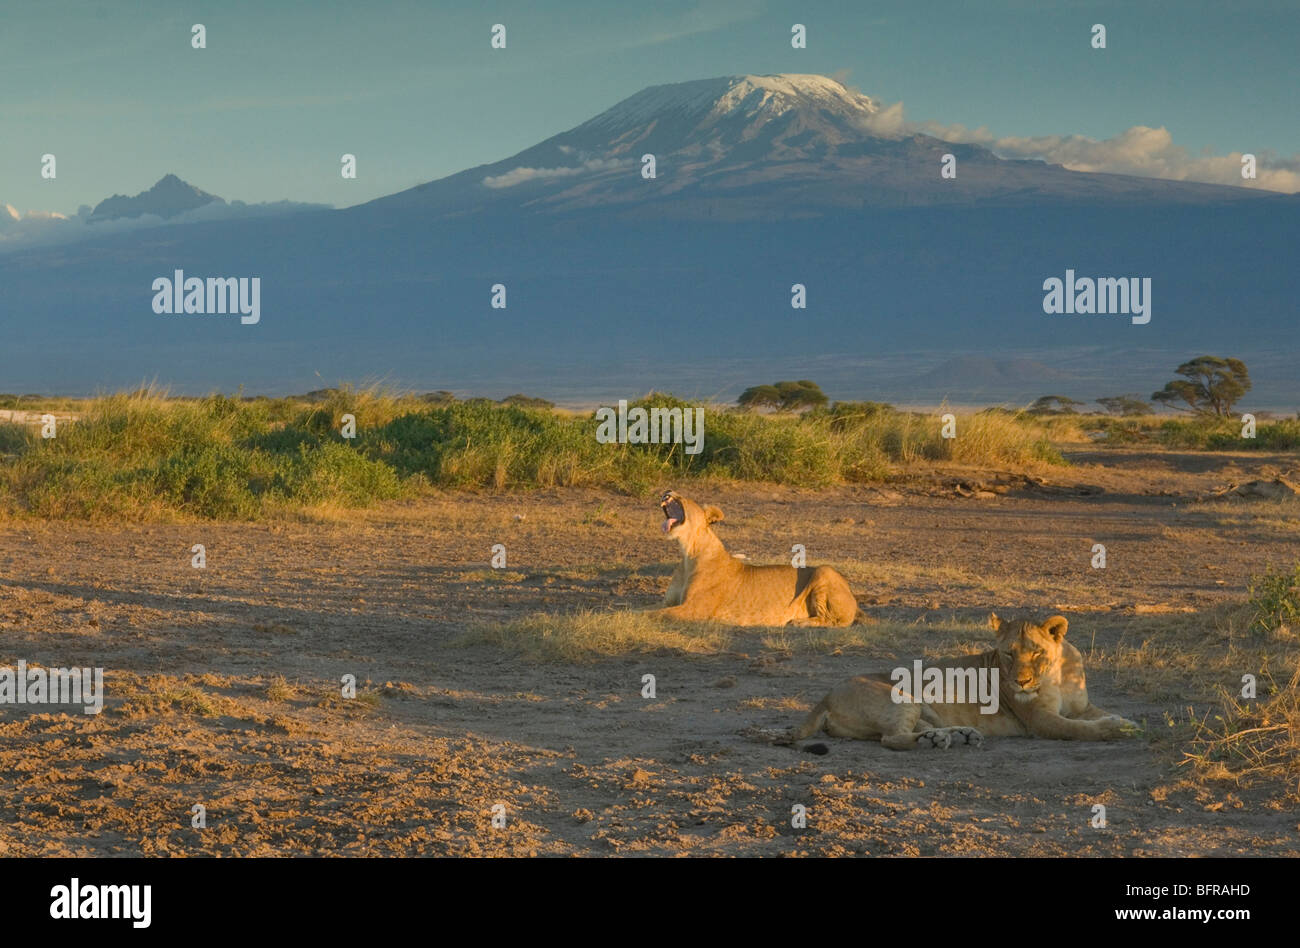 Two young lions (Panthera leo) lying on the Amboseli plain against the backdrop of the snow-capped peaks of Kilimanjaro Stock Photo